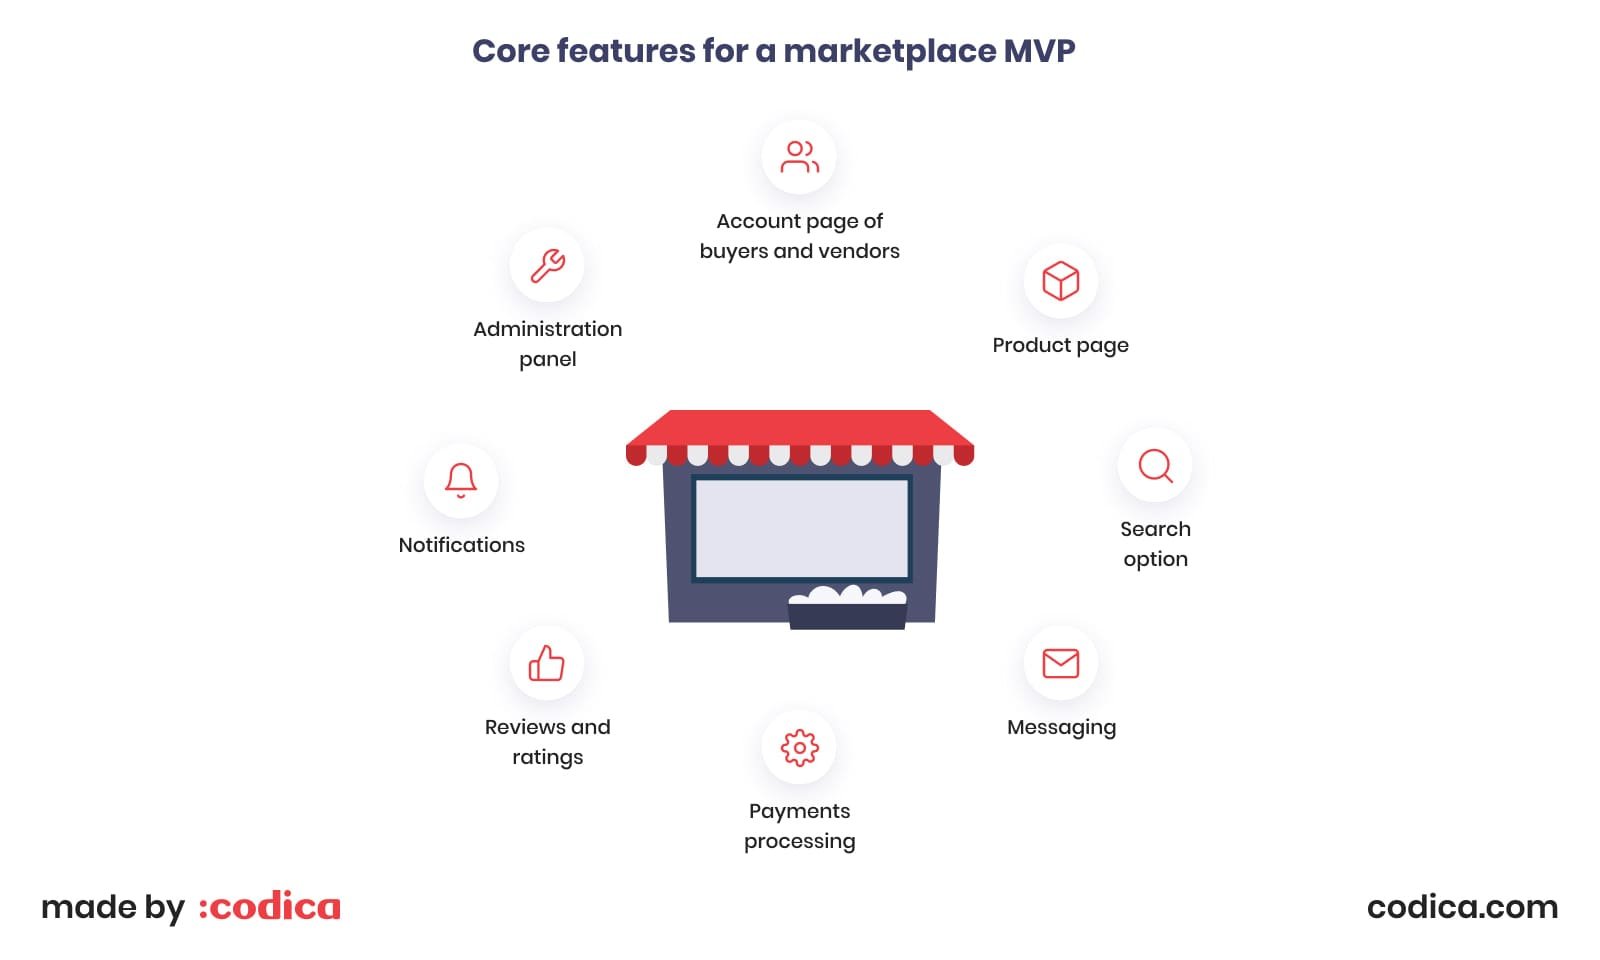 Core features for a marketplace MVP